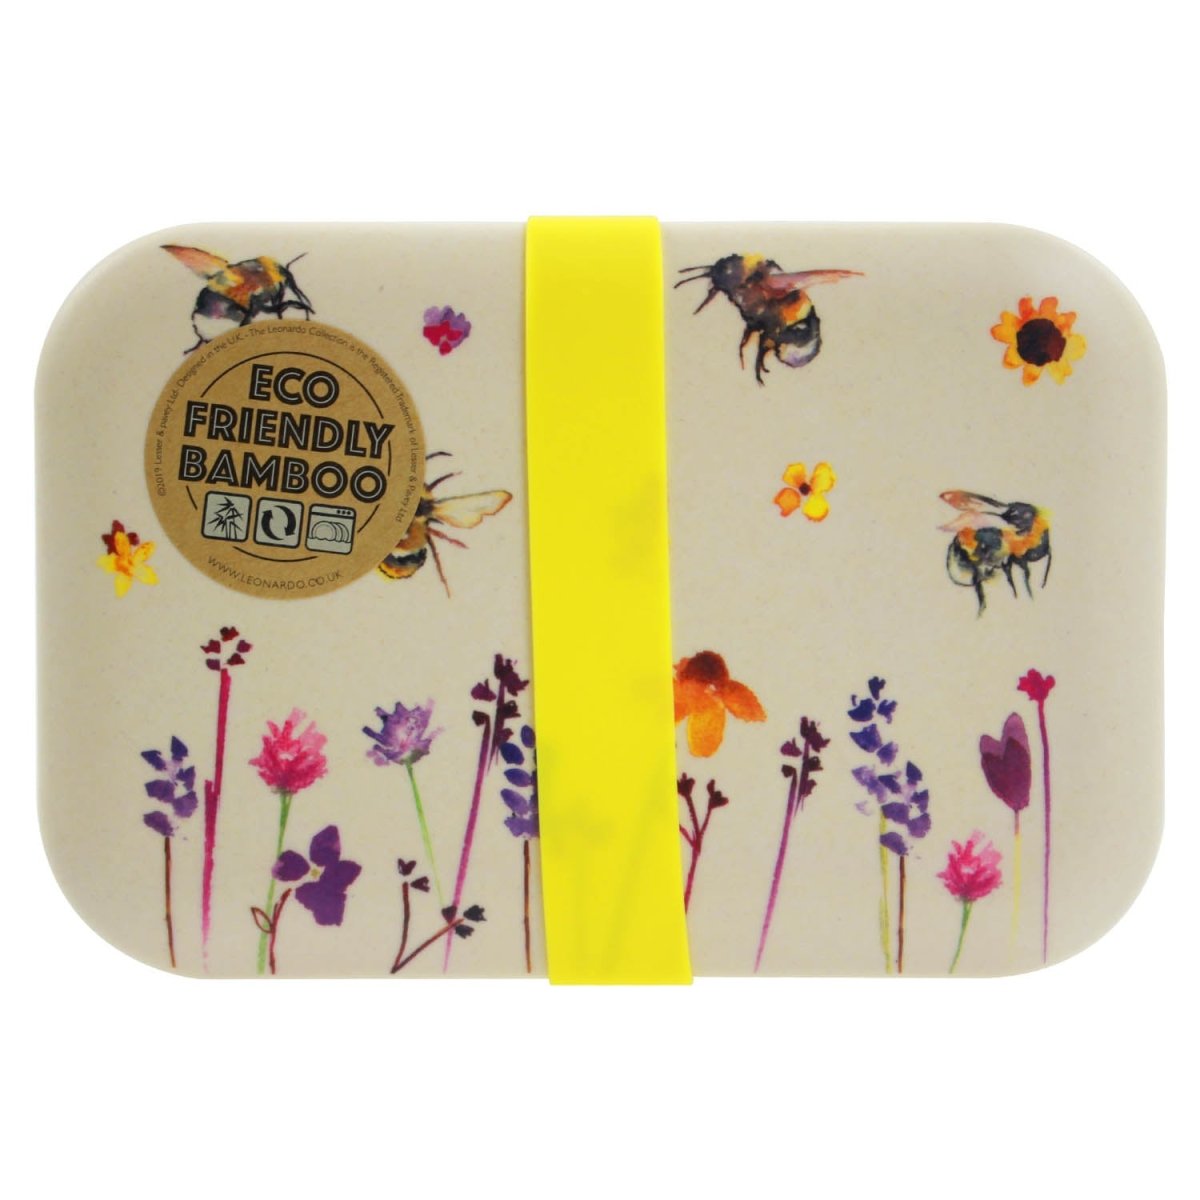 Eco-Friendly Bamboo Bees & Flowers Lunch Bento Box - Bonnypack